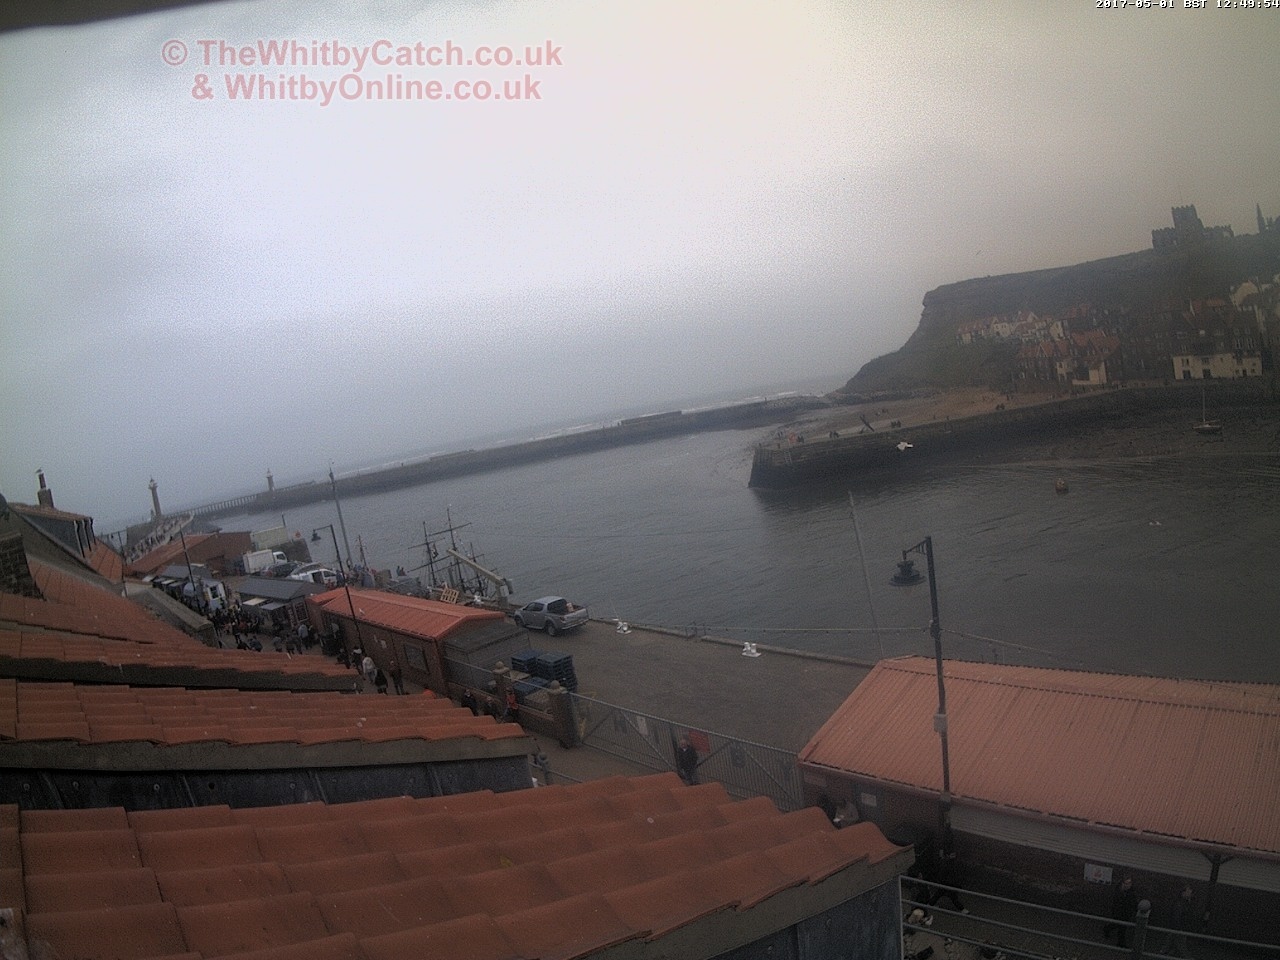 Whitby Mon 1st May 2017 12:50.